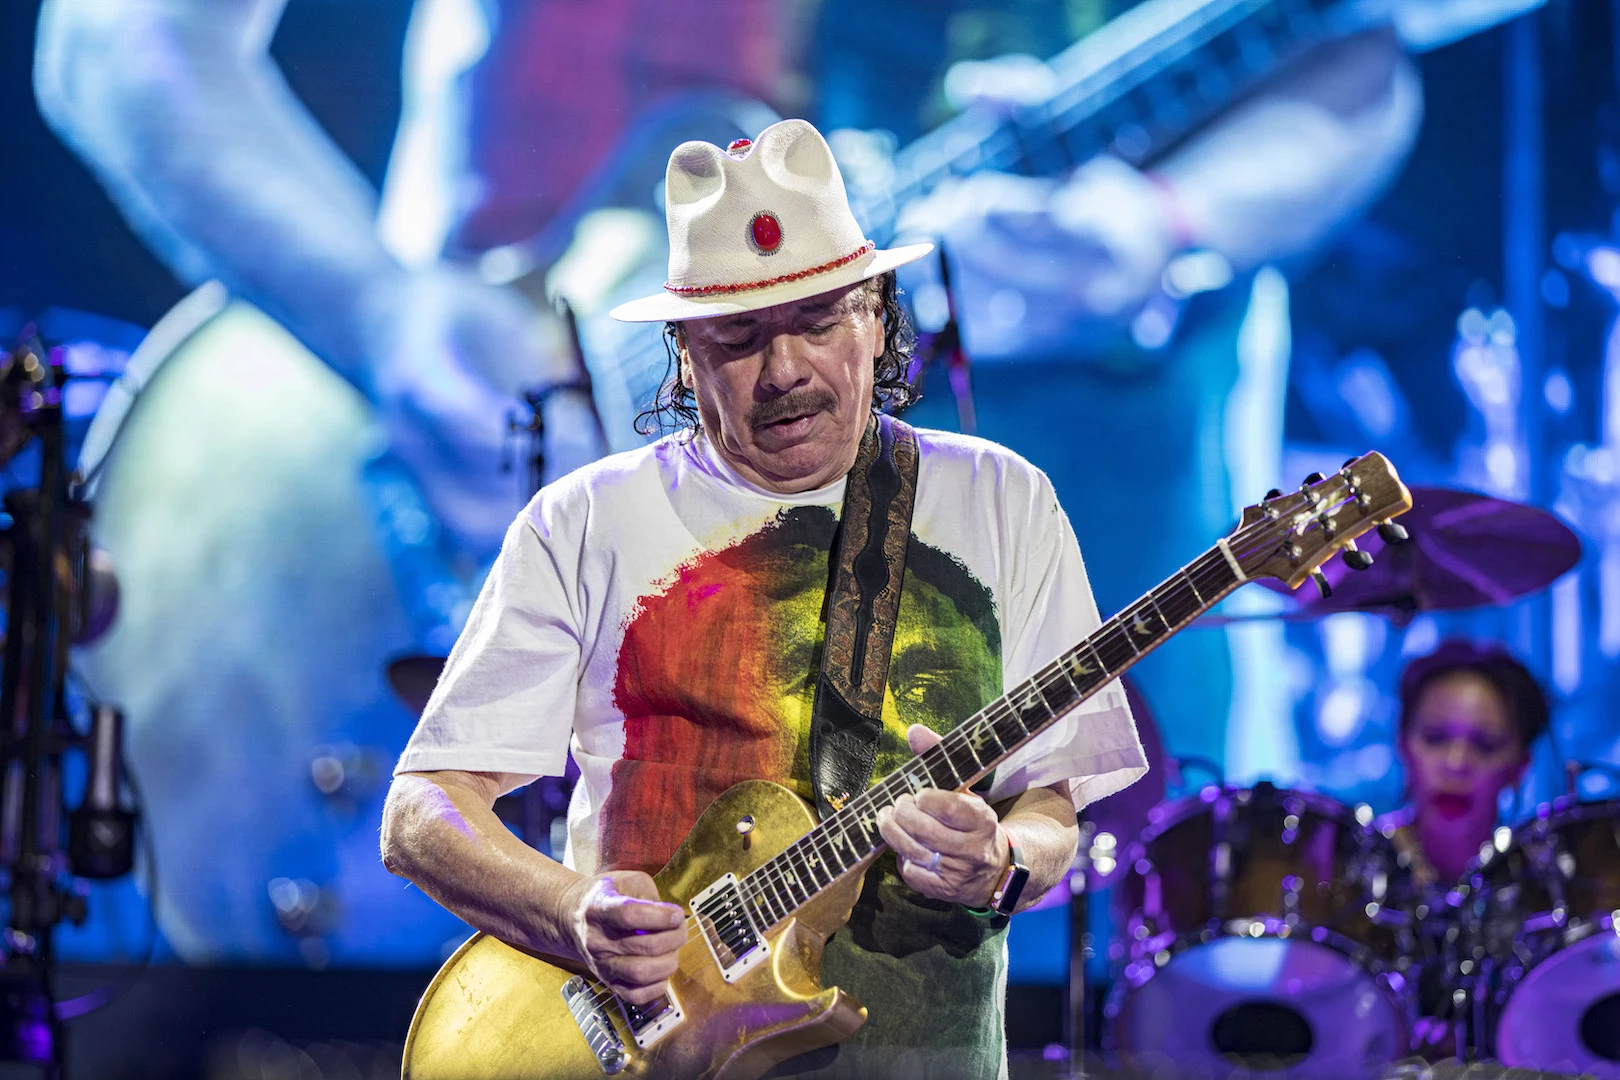 Carlos Santana 'Doing Very Well' After Onstage Collapse, Wife Says